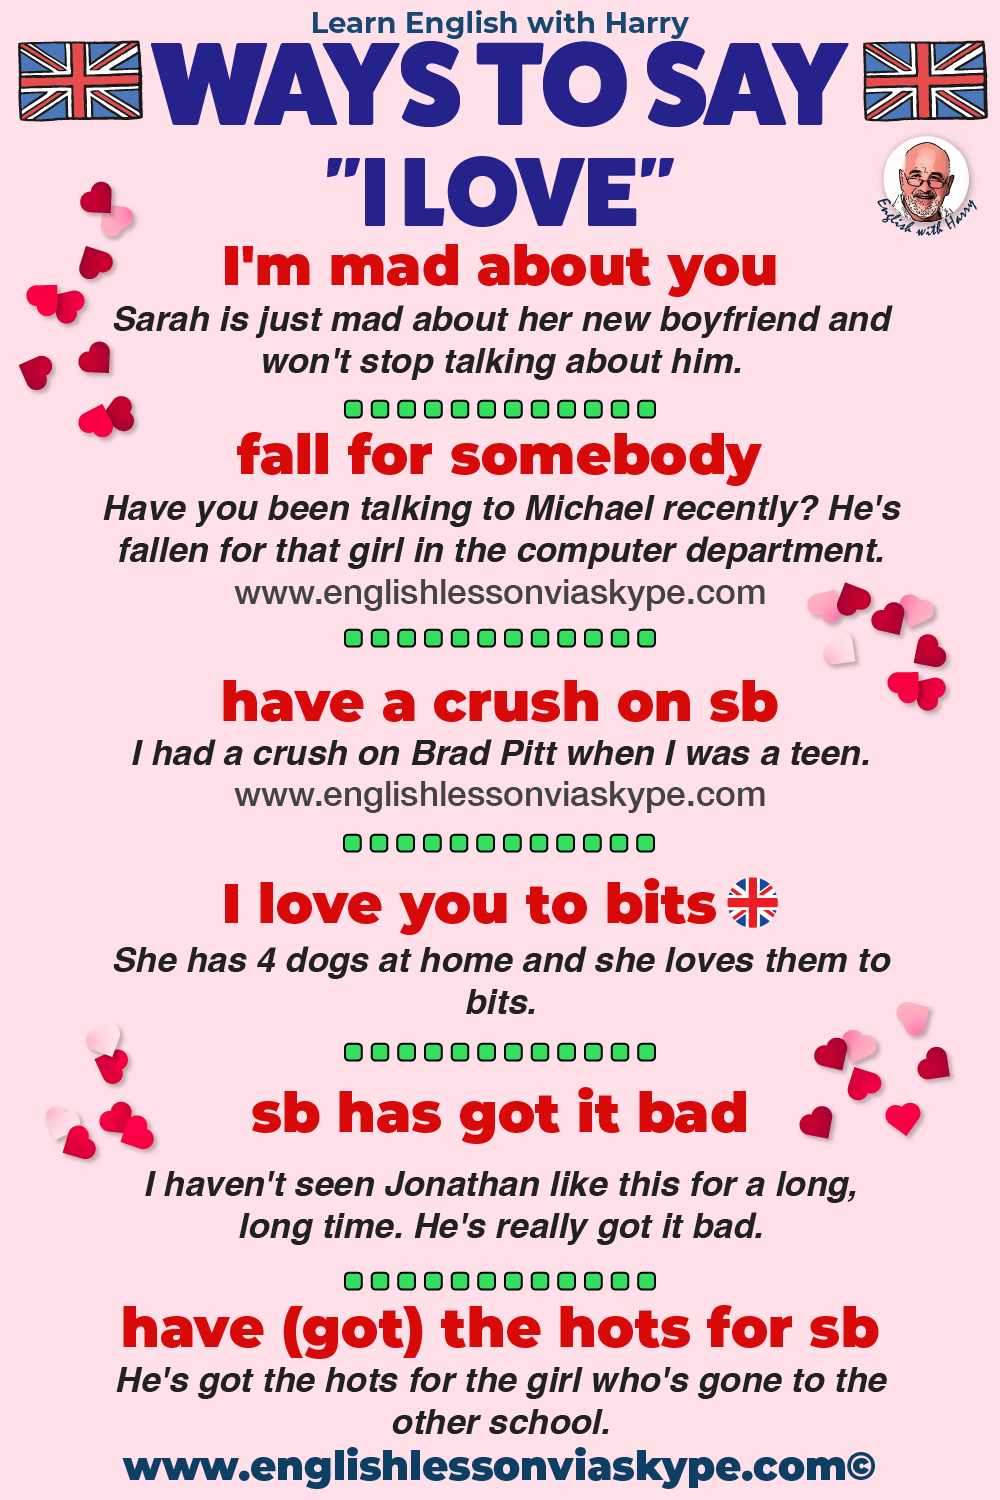 14 Ways to say I love you in English. Improve English speaking. Advanced English lessons on Zoom and Skype. Improve English speaking and writing skills. #learnenglish